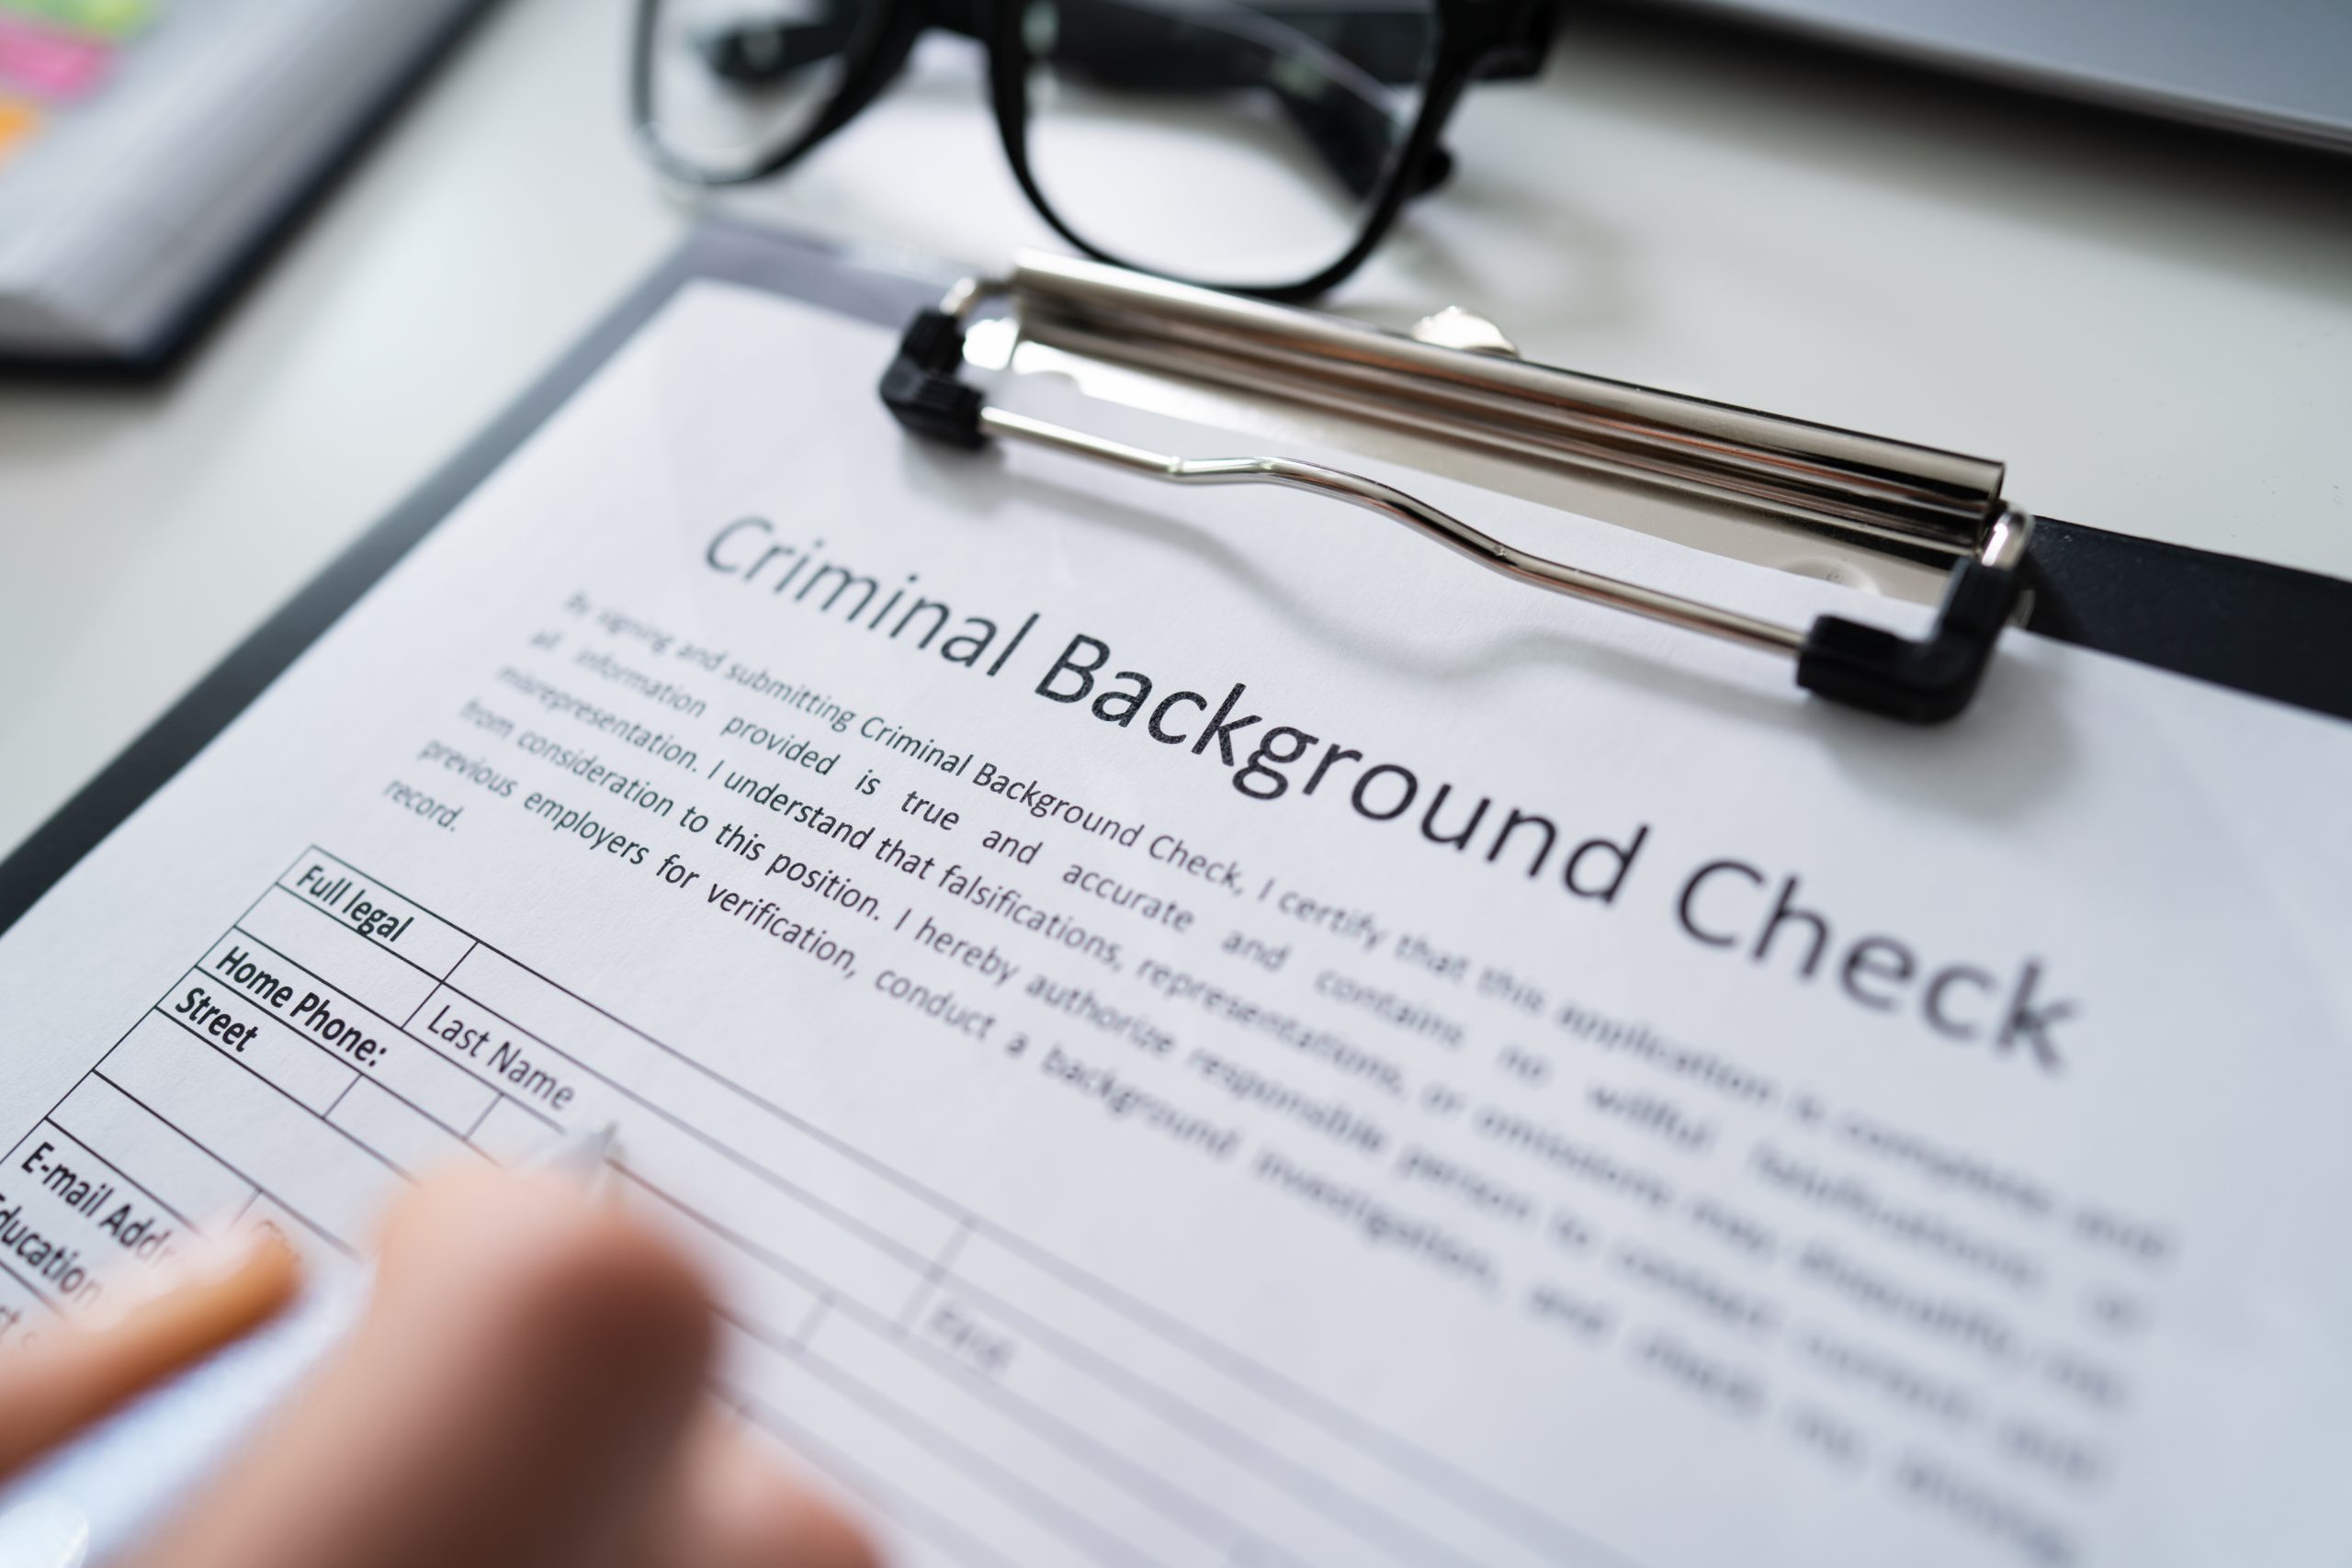 Do You Do Background Checks On People You're Interested In Dating?